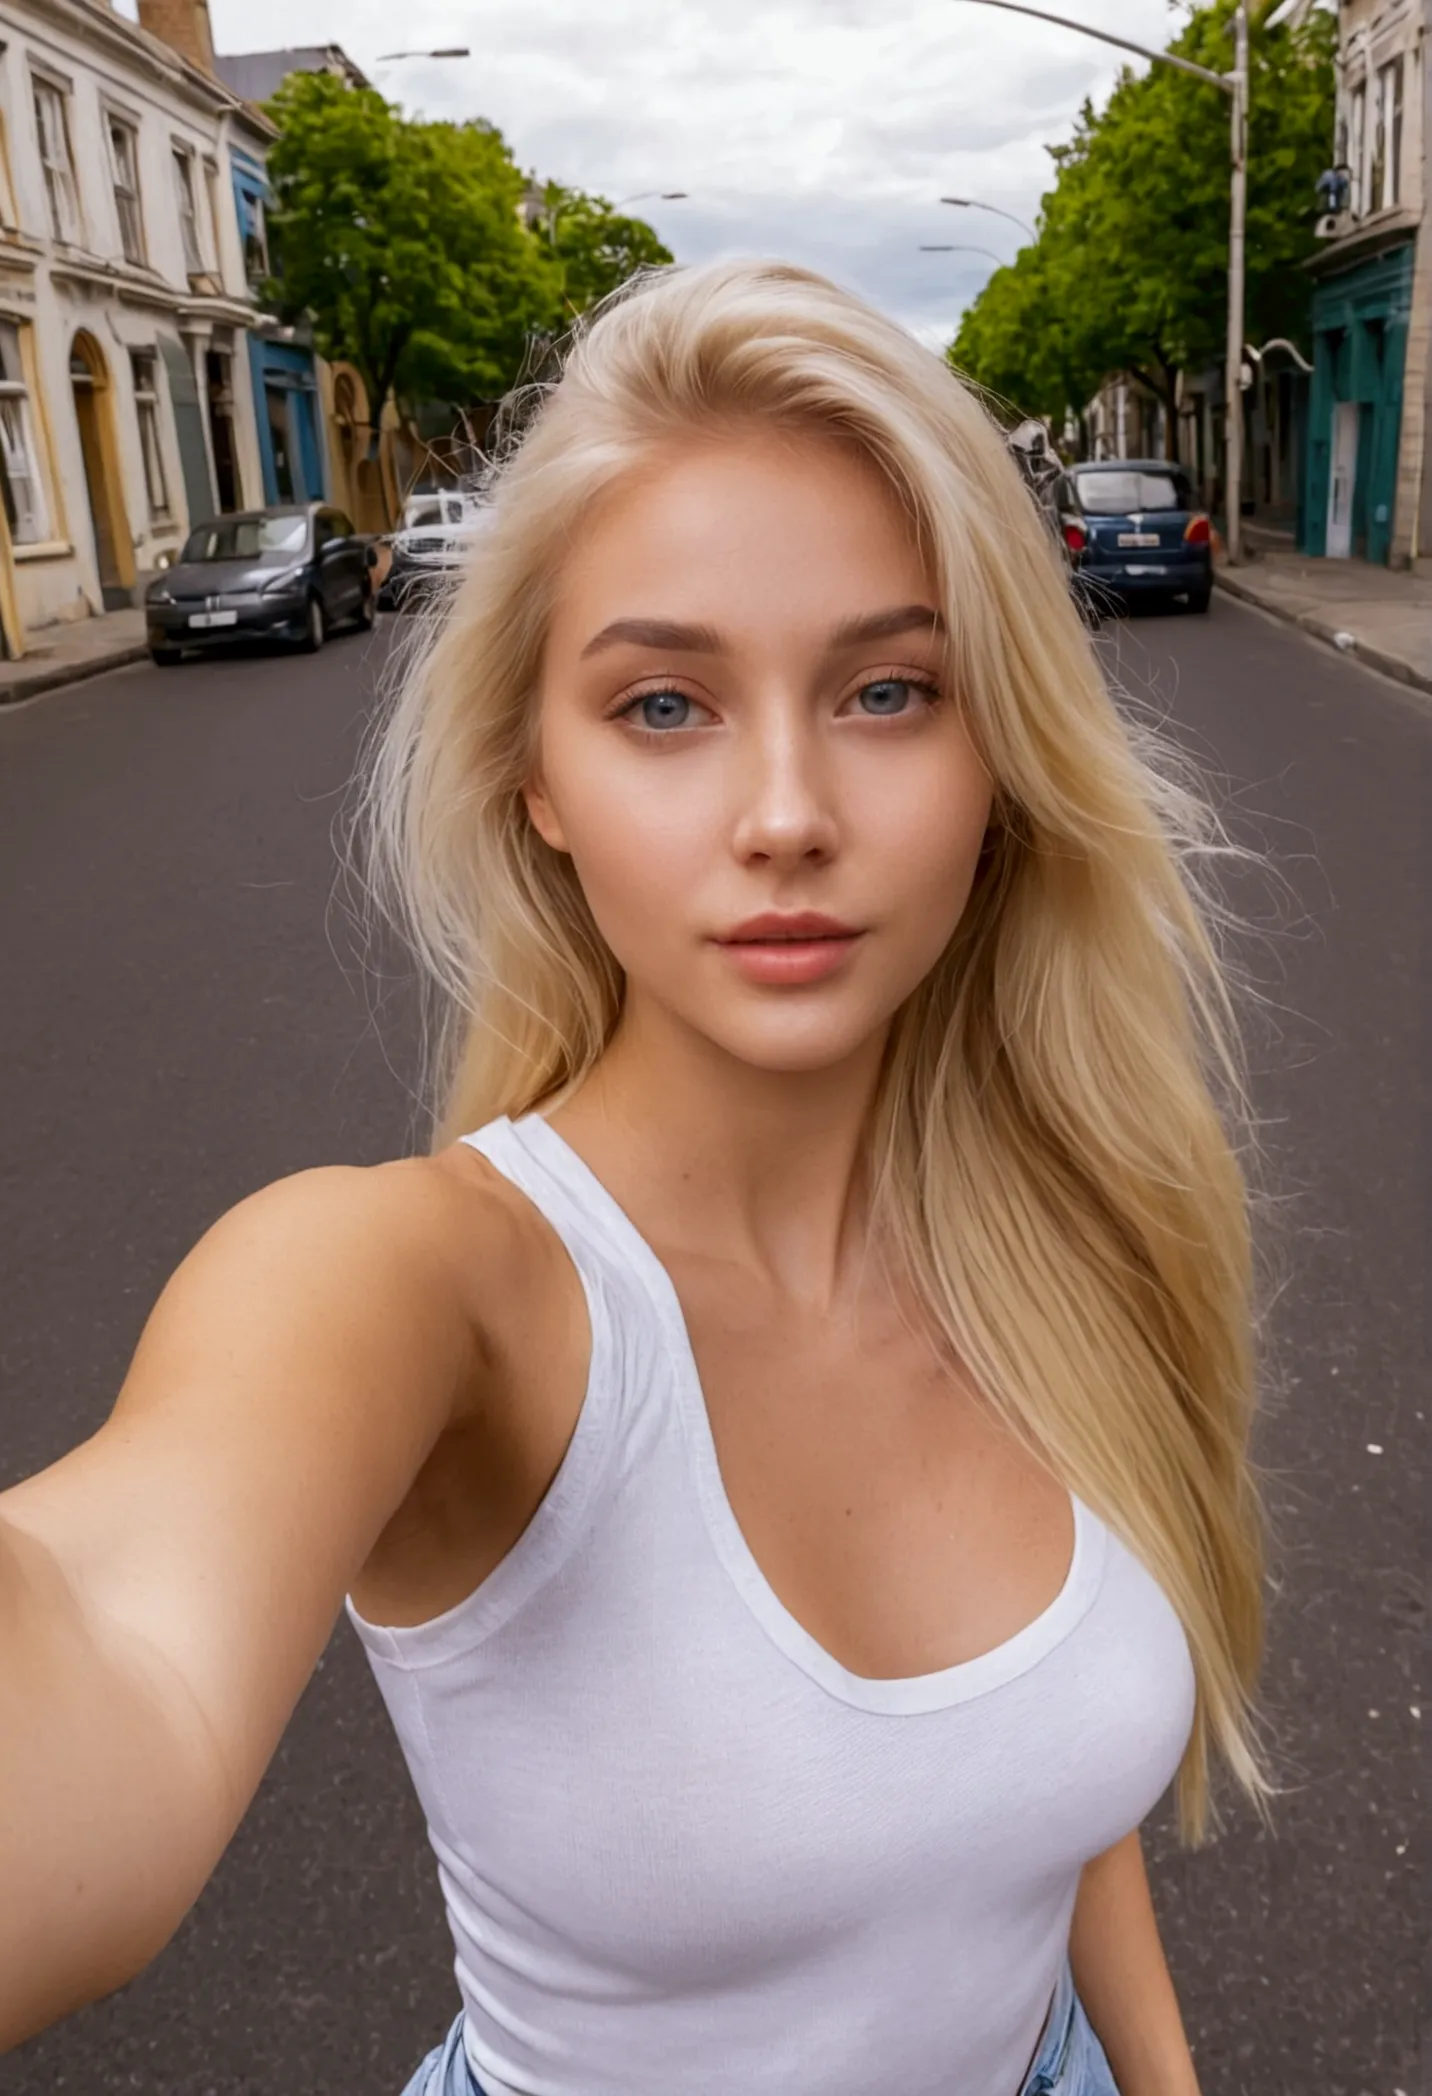 beautiful blonde girl taking a frontal selfie on the street with her arm outstretched&#39;where the camera is located